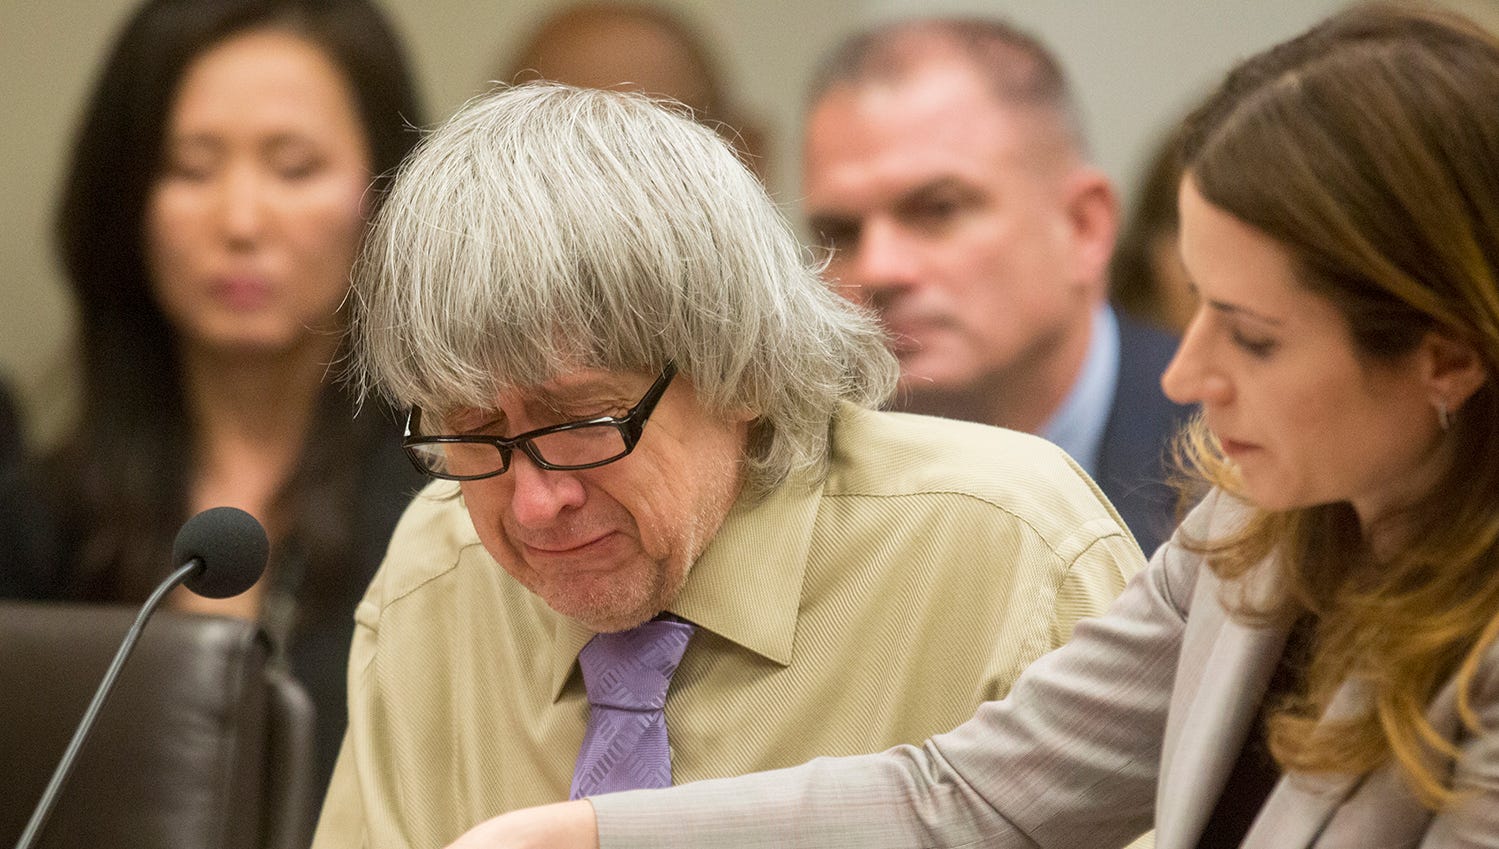 Turpin case: Desert how they covered the child abuse case